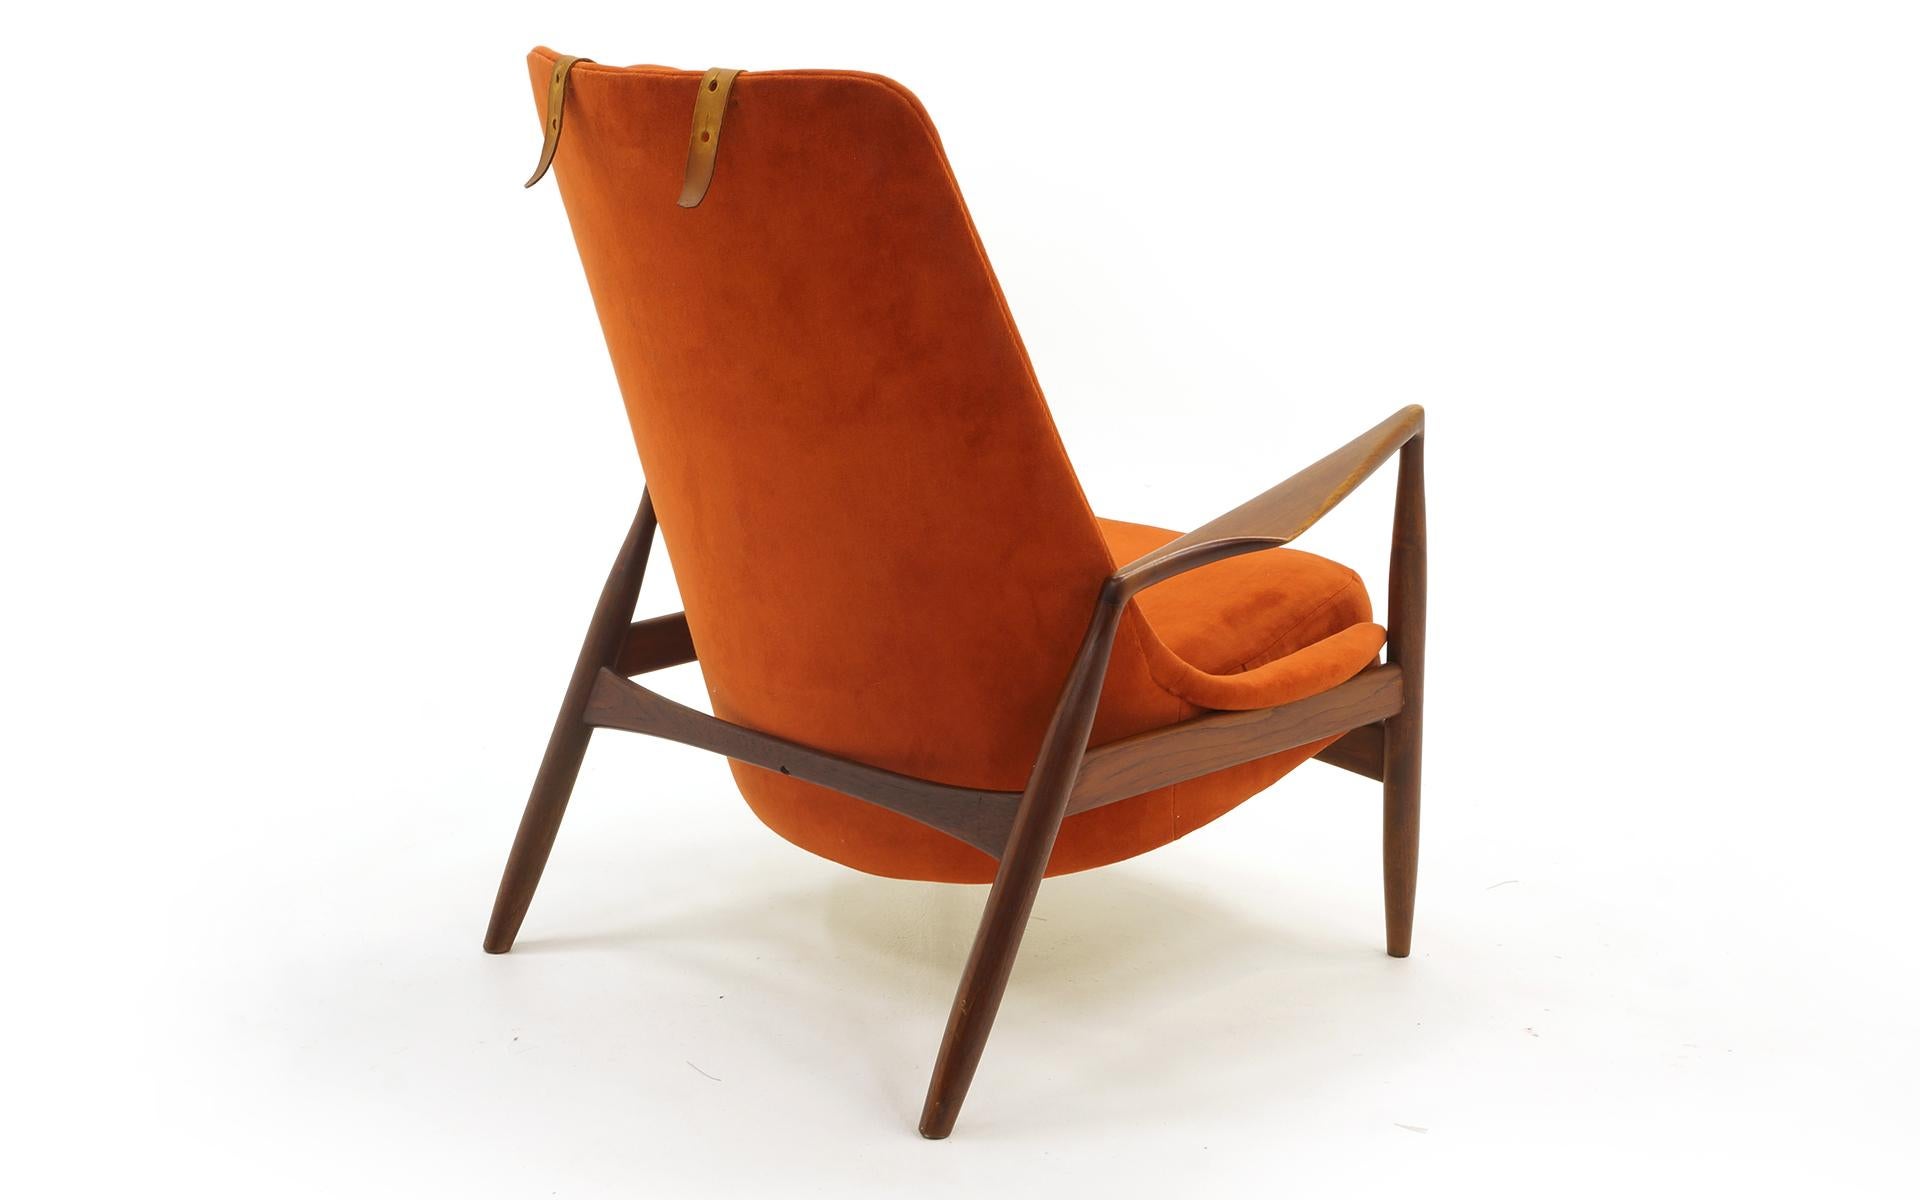 Swedish High Back Seal or Sälen Lounge Chair by Kofod-Larsen for OPE, Sweden, 1960.